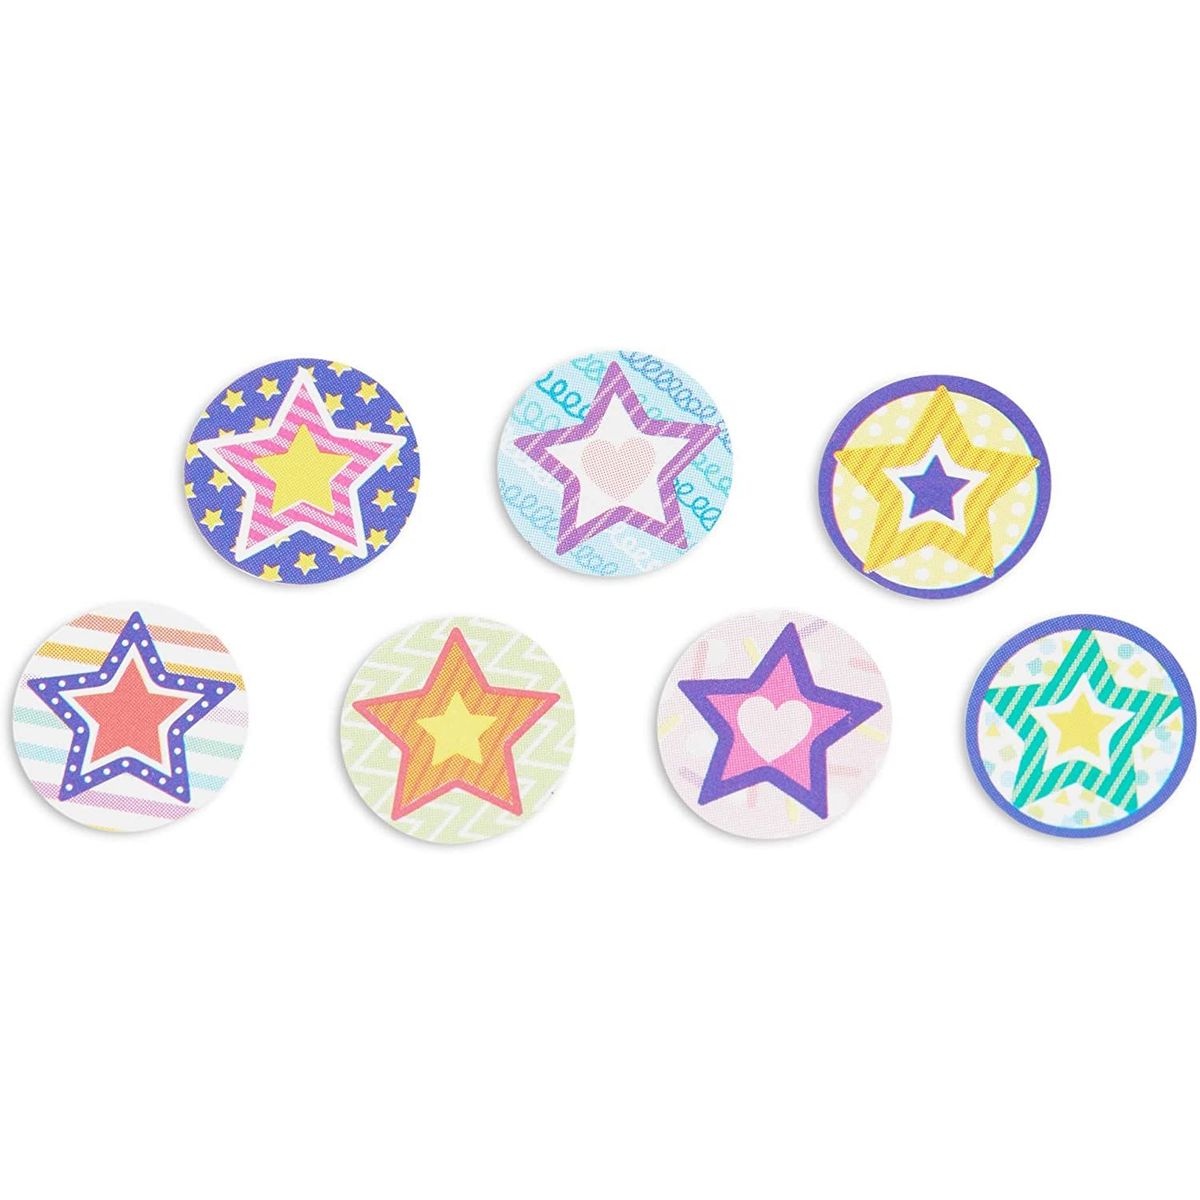 2730 Count Teacher Star Reward Stickers for Kids and Students, Small Sticker for Behavior Chart, Classroom Supplies, 30 Sheets, Assorted Designs